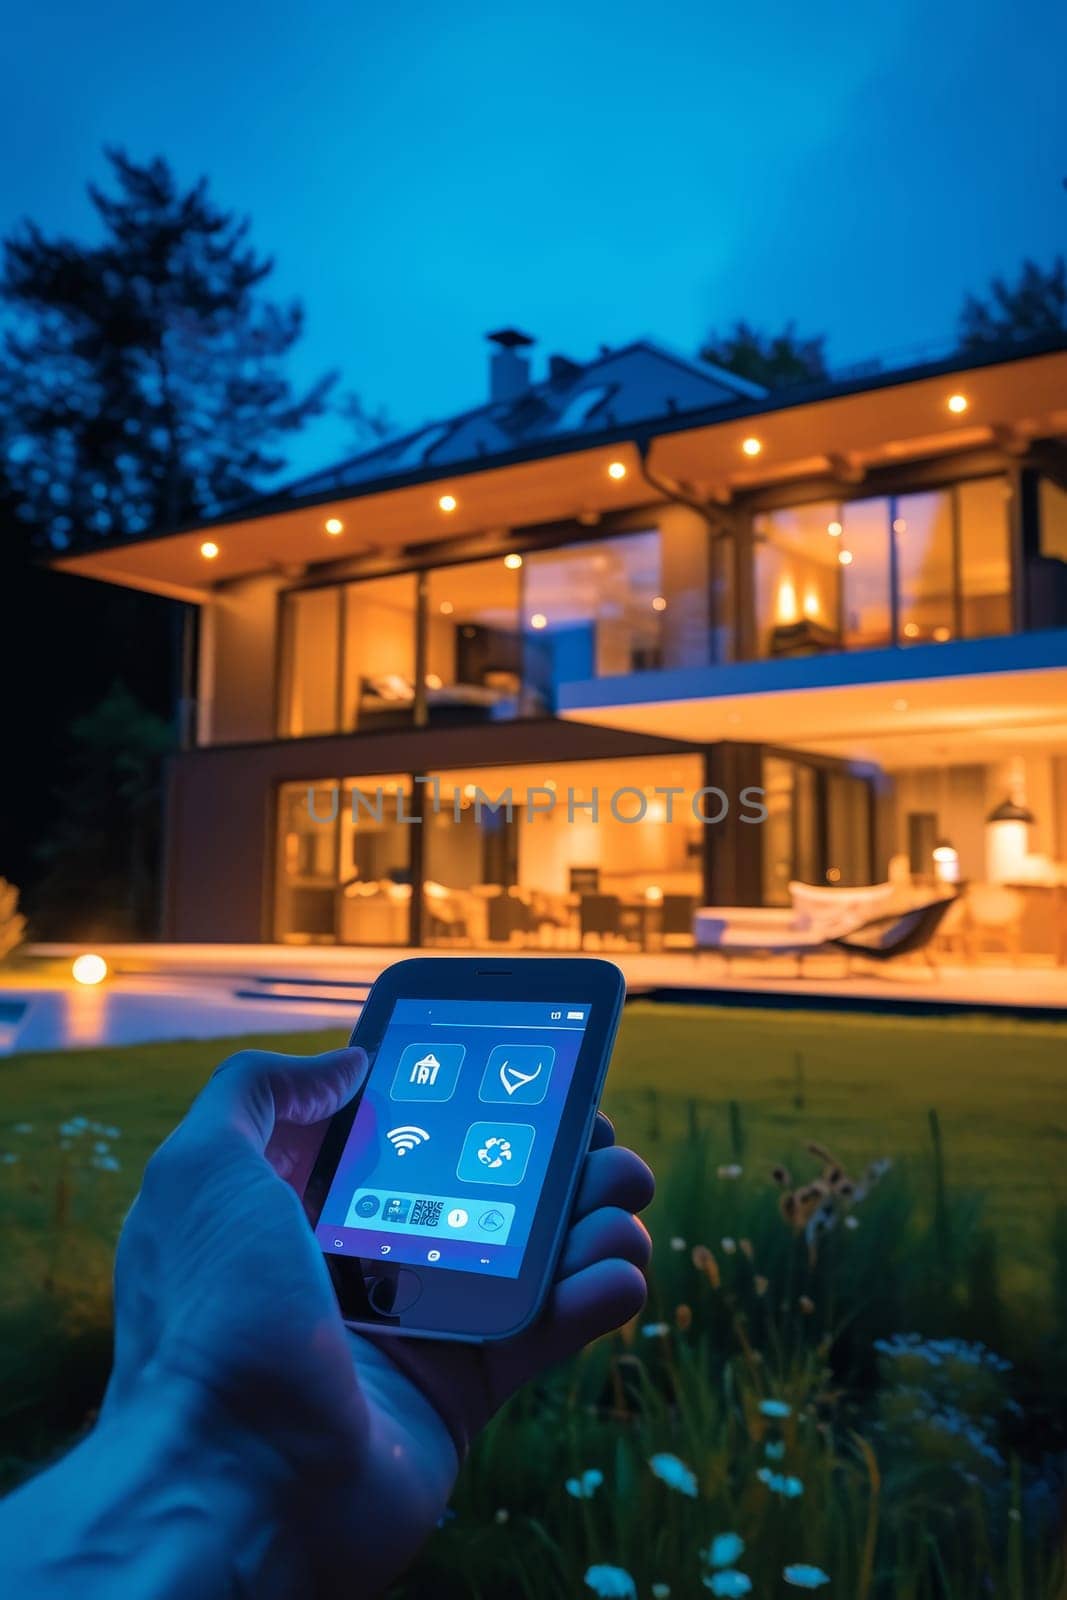 A person holding a smartphone showcasing an app interface with a modern house in the background